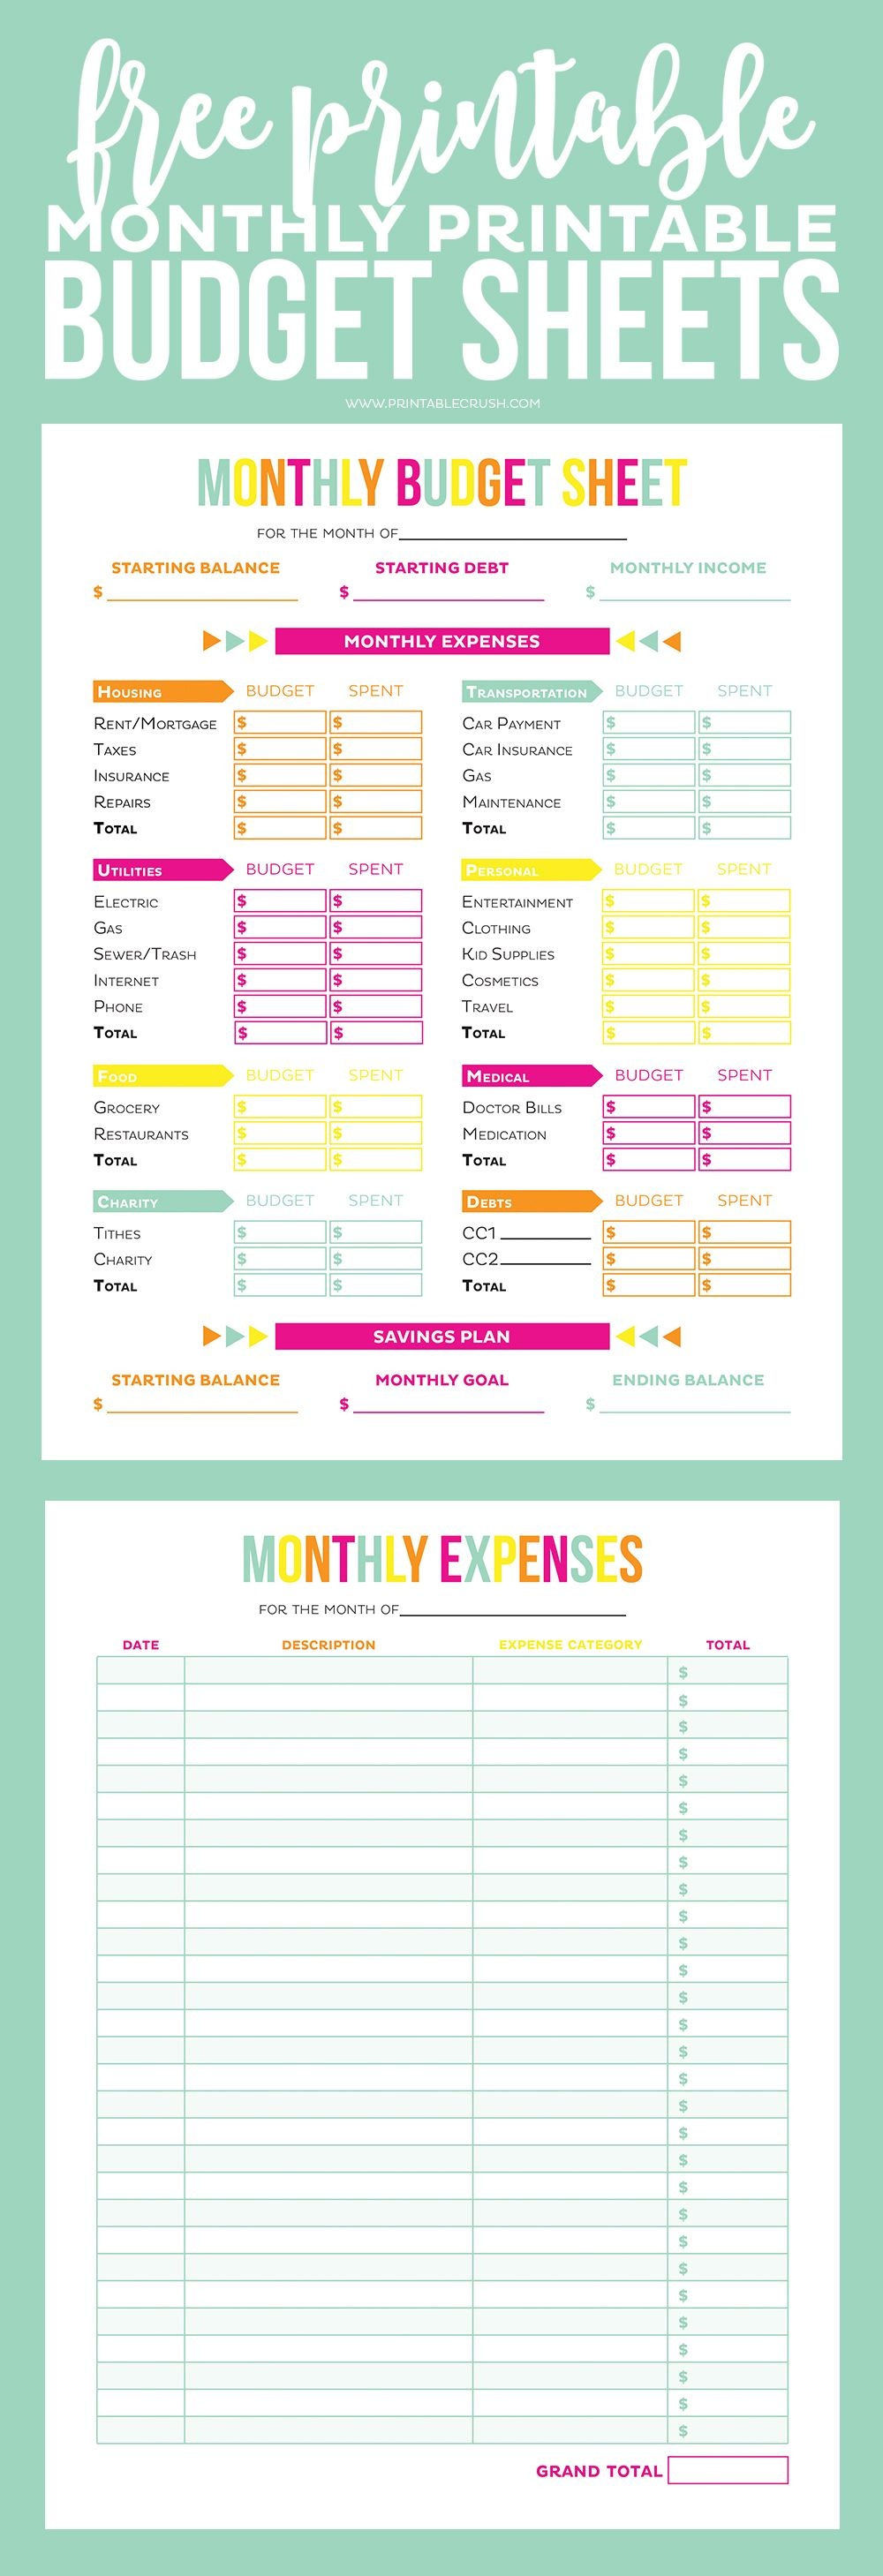 Get Your Finances In Order With These Free Printable Budget Sheets - Free Printable Budget Worksheets